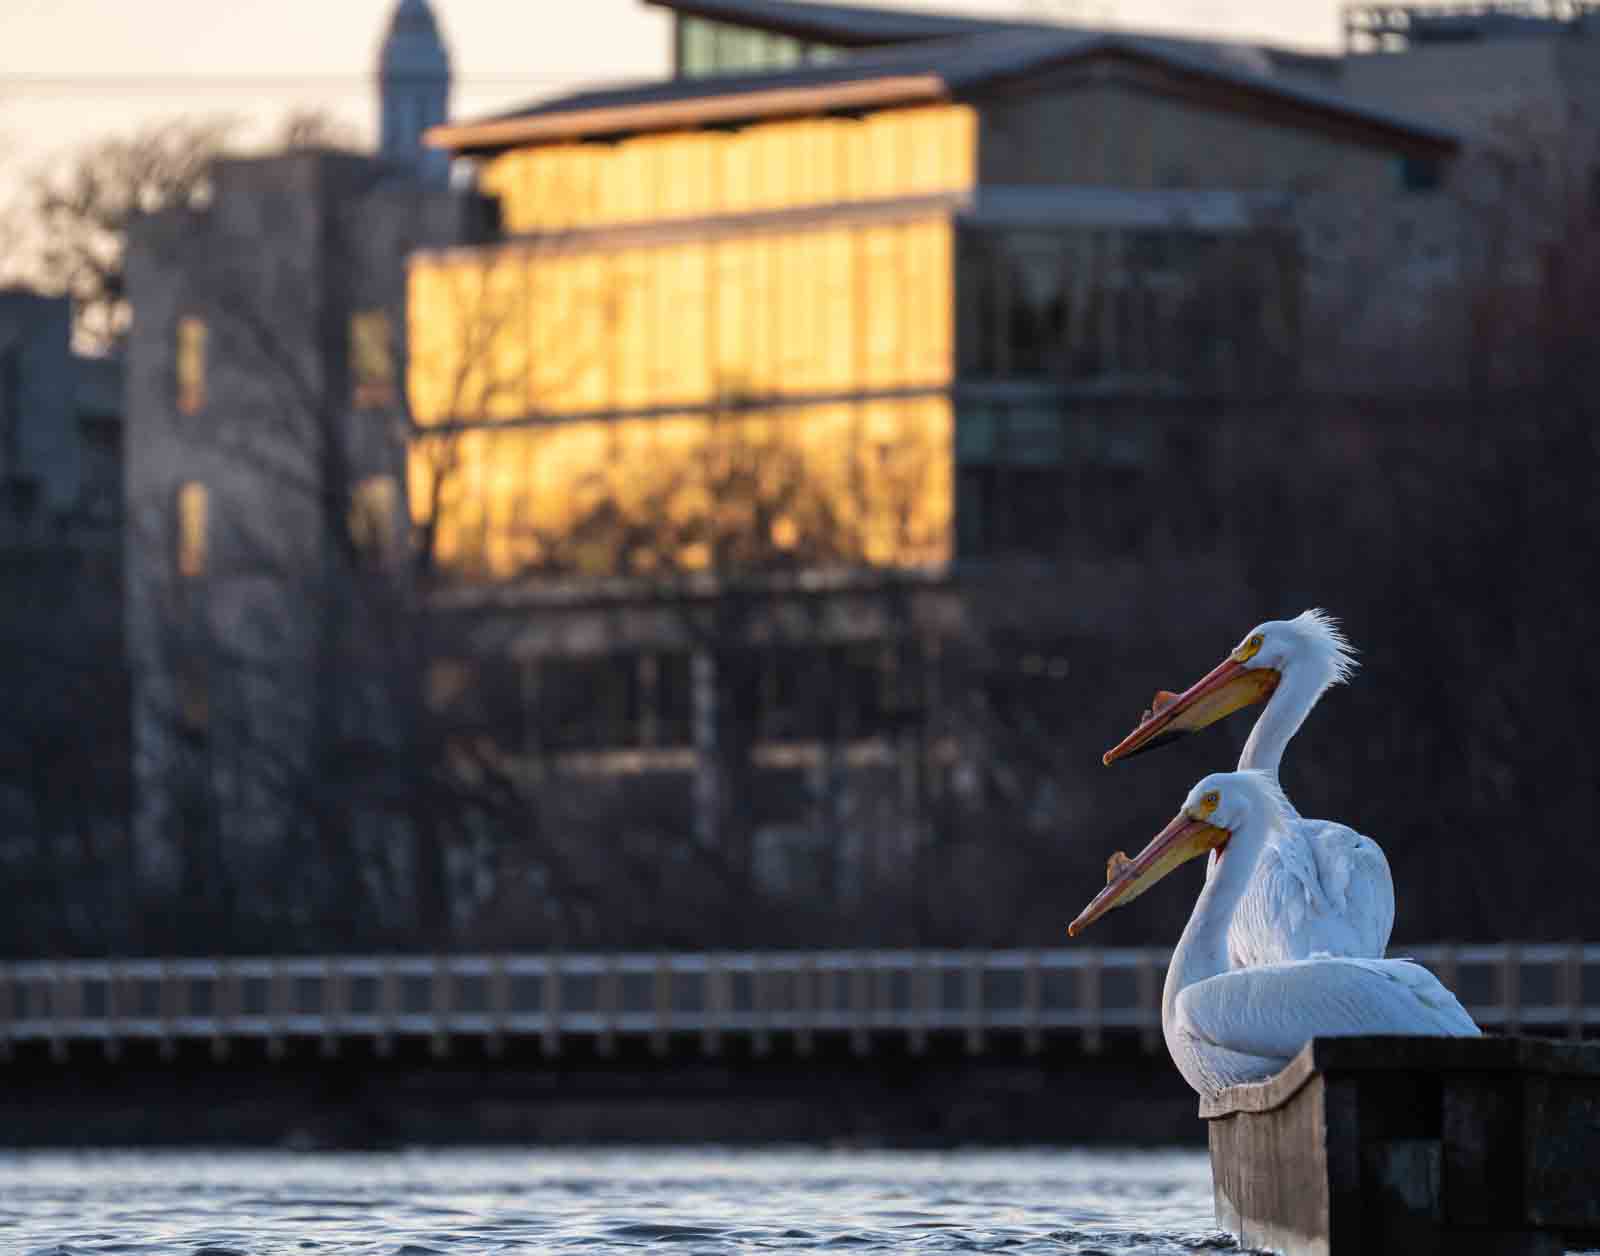 Pelicans rest along the Fox River with Warch Campus Center in the background.